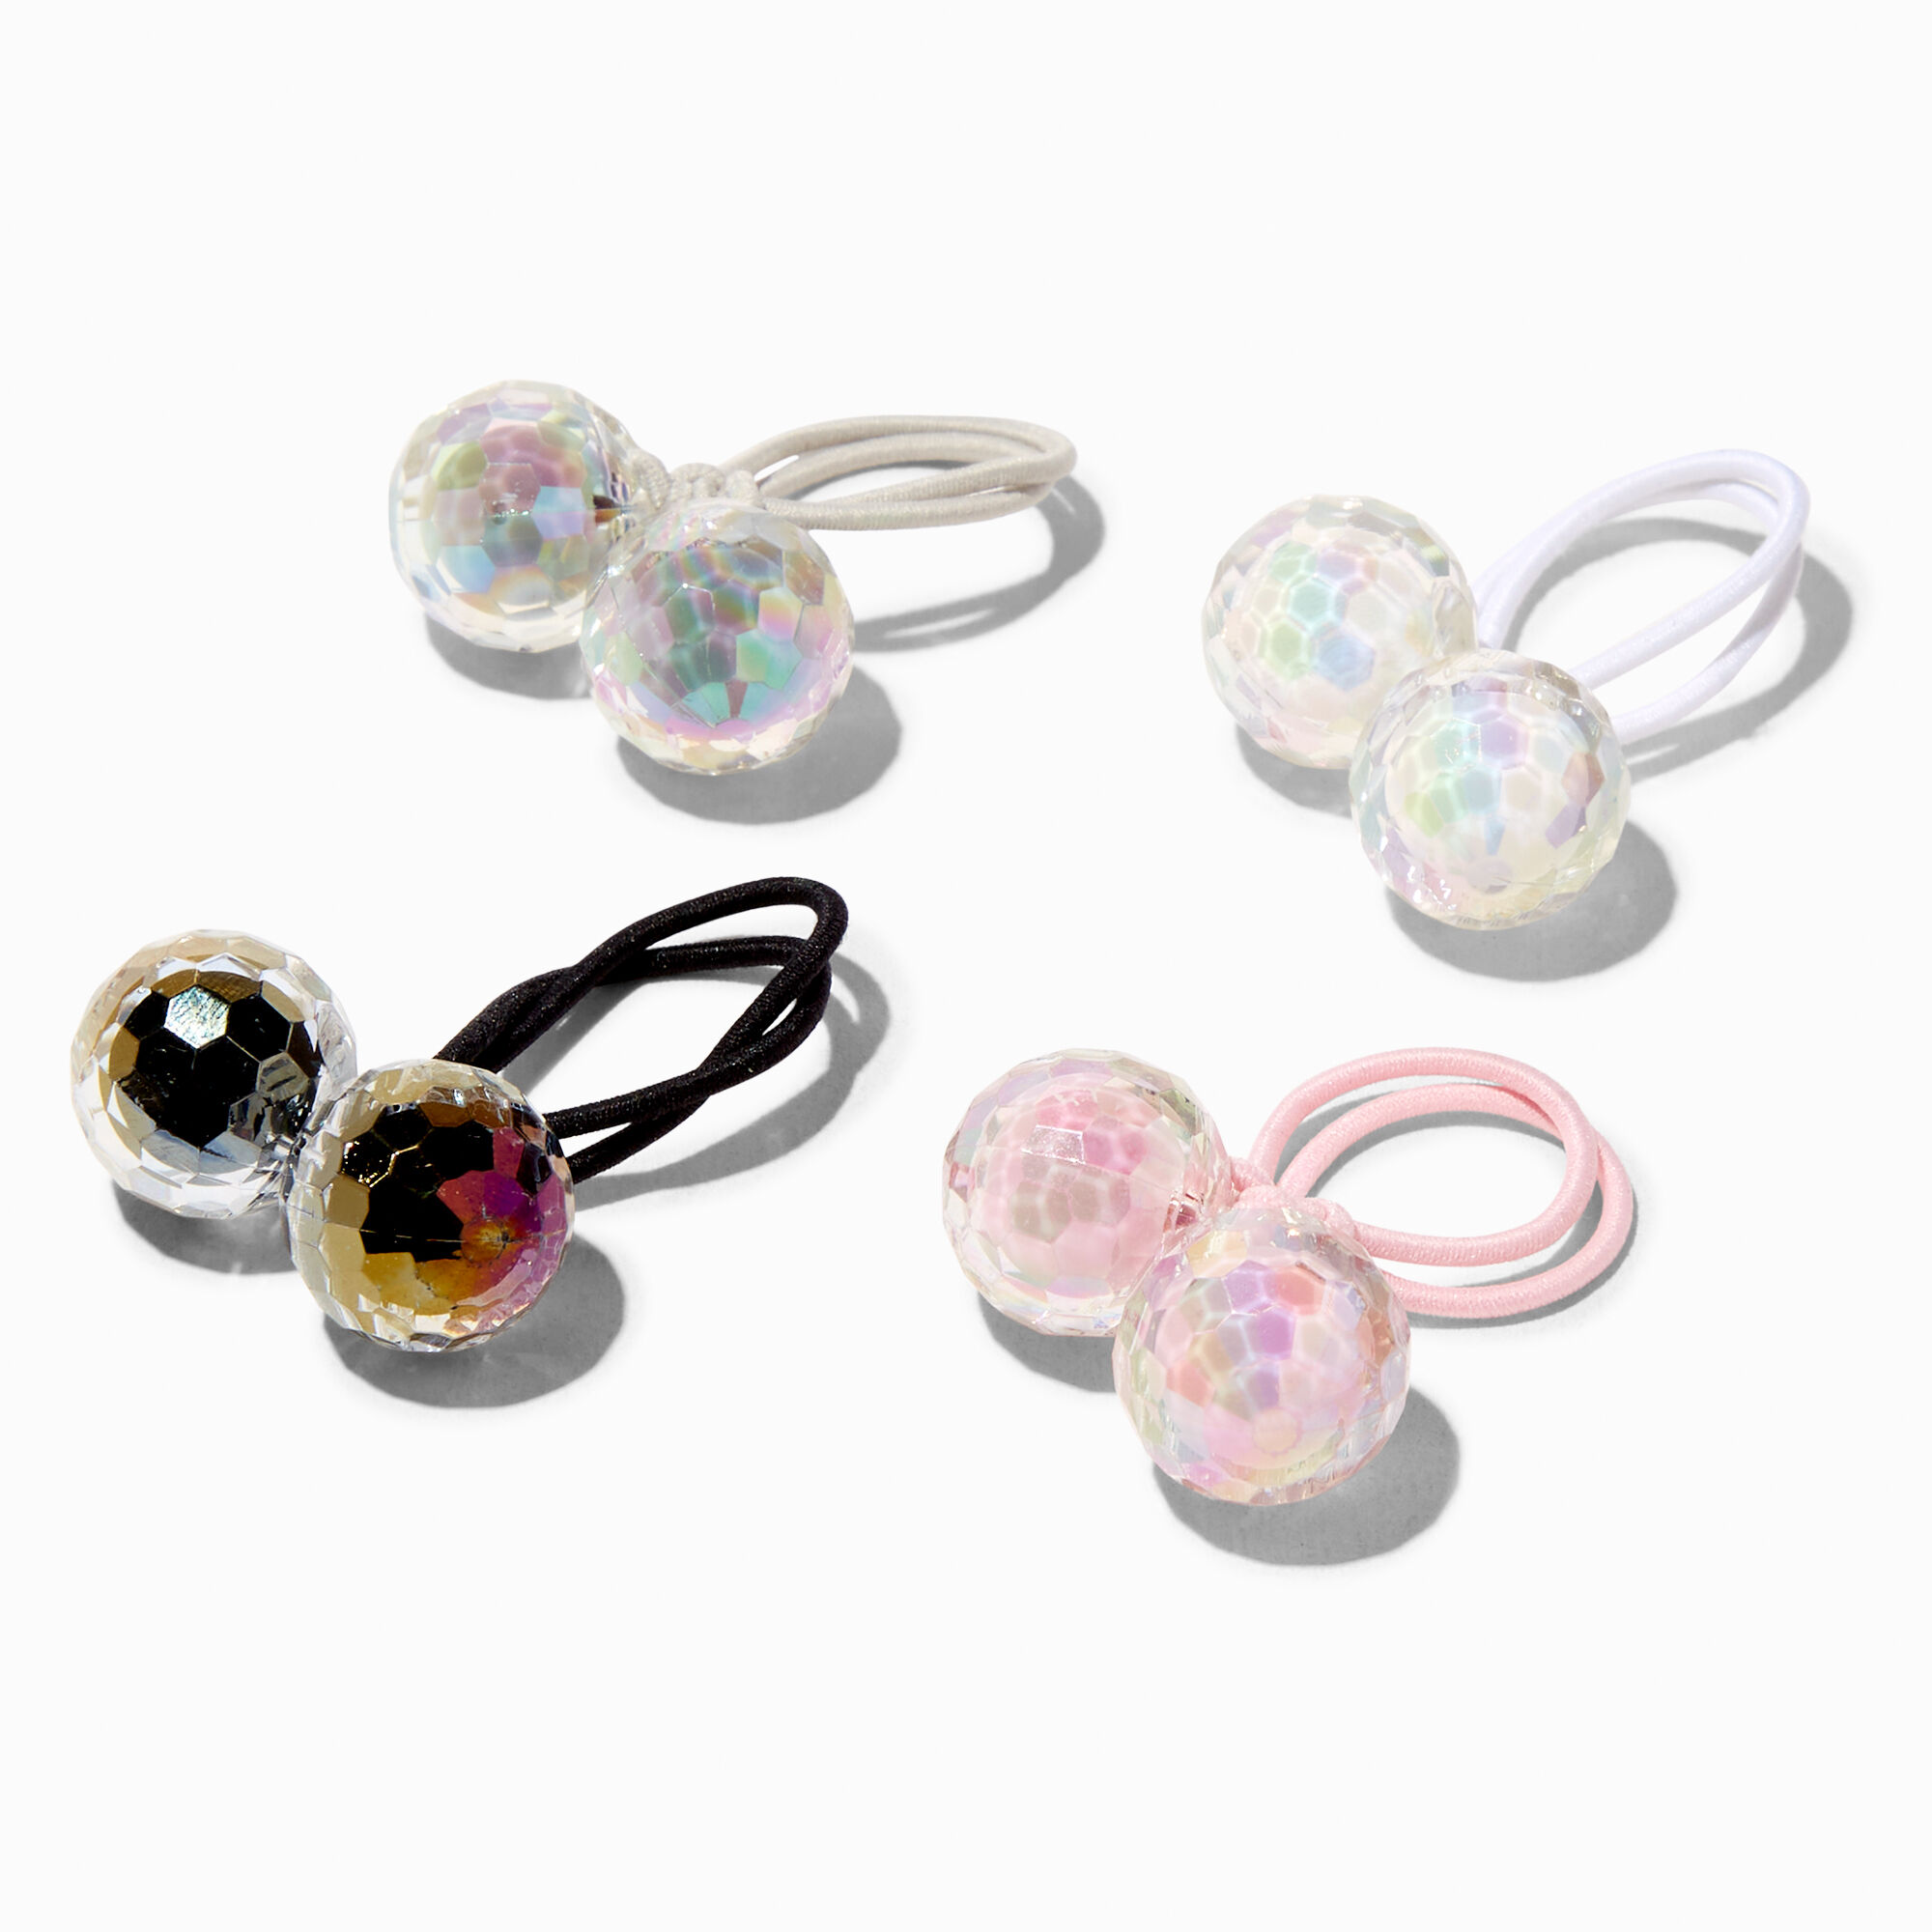 View Claires Club Edgy Iridescent Knocker Bead Hair Ties 4 Pack information